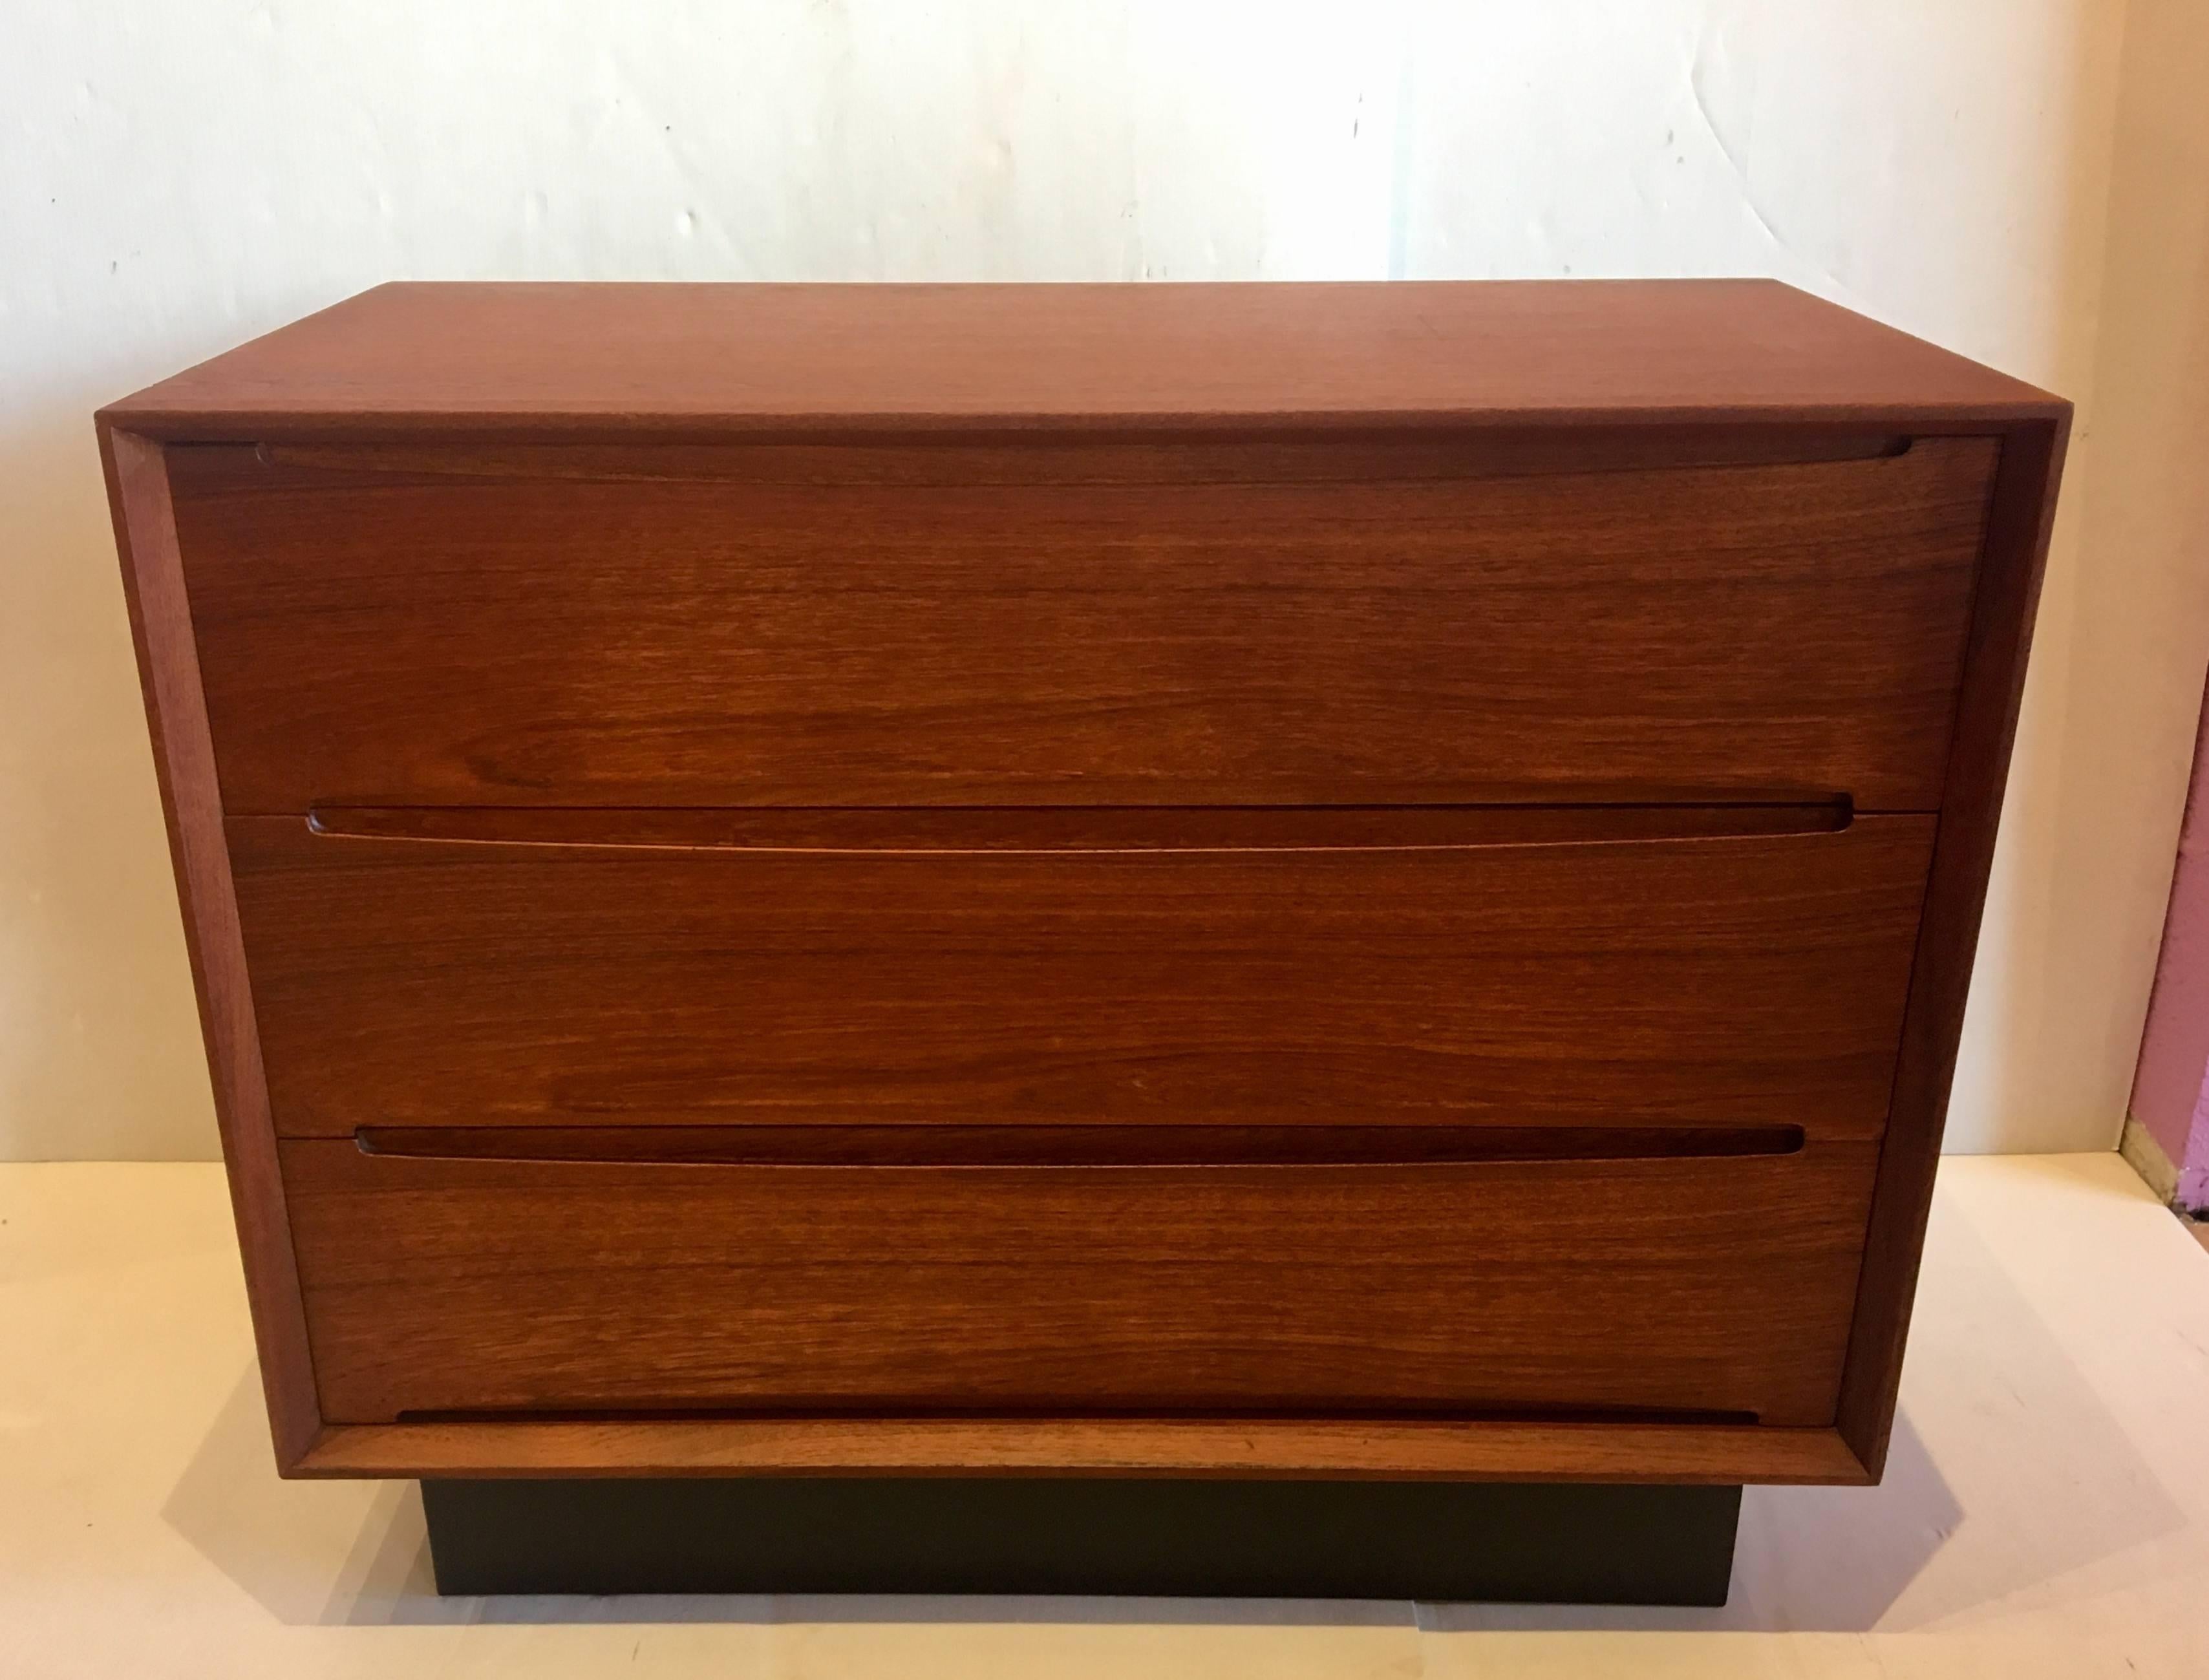 Great quality and craftsmanship on this elegant small triple dresser by Dyrlund made in Denmark, refinished in the back dovetail drawers and freshly restored. Sitting on a black lacquer wood base to give a floating illusion.